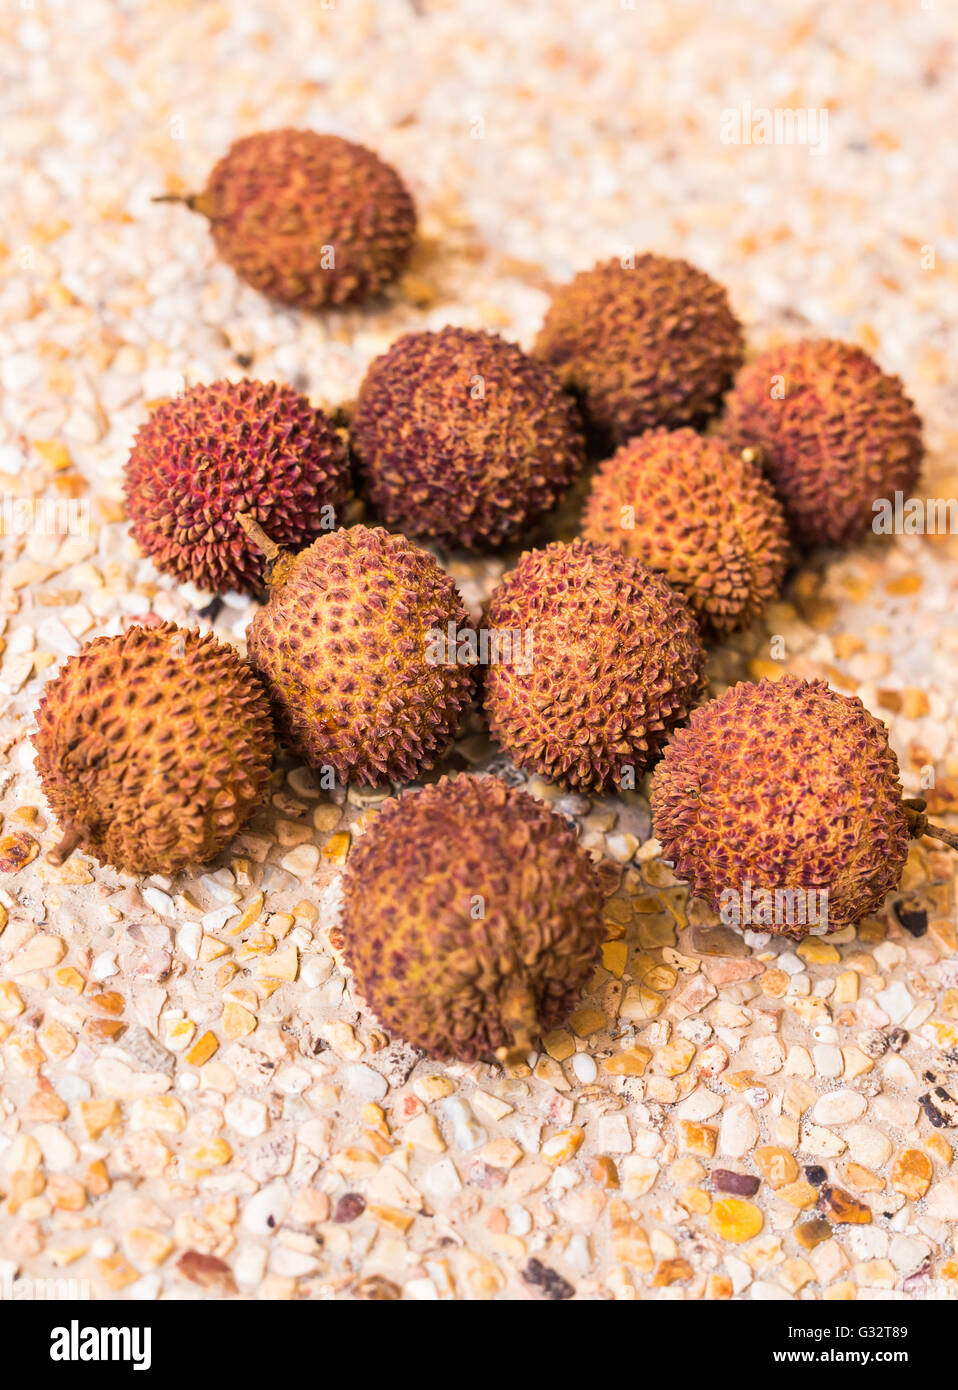 Fresh lychee, Fruits, diet, healthy food concept. Stock Photo